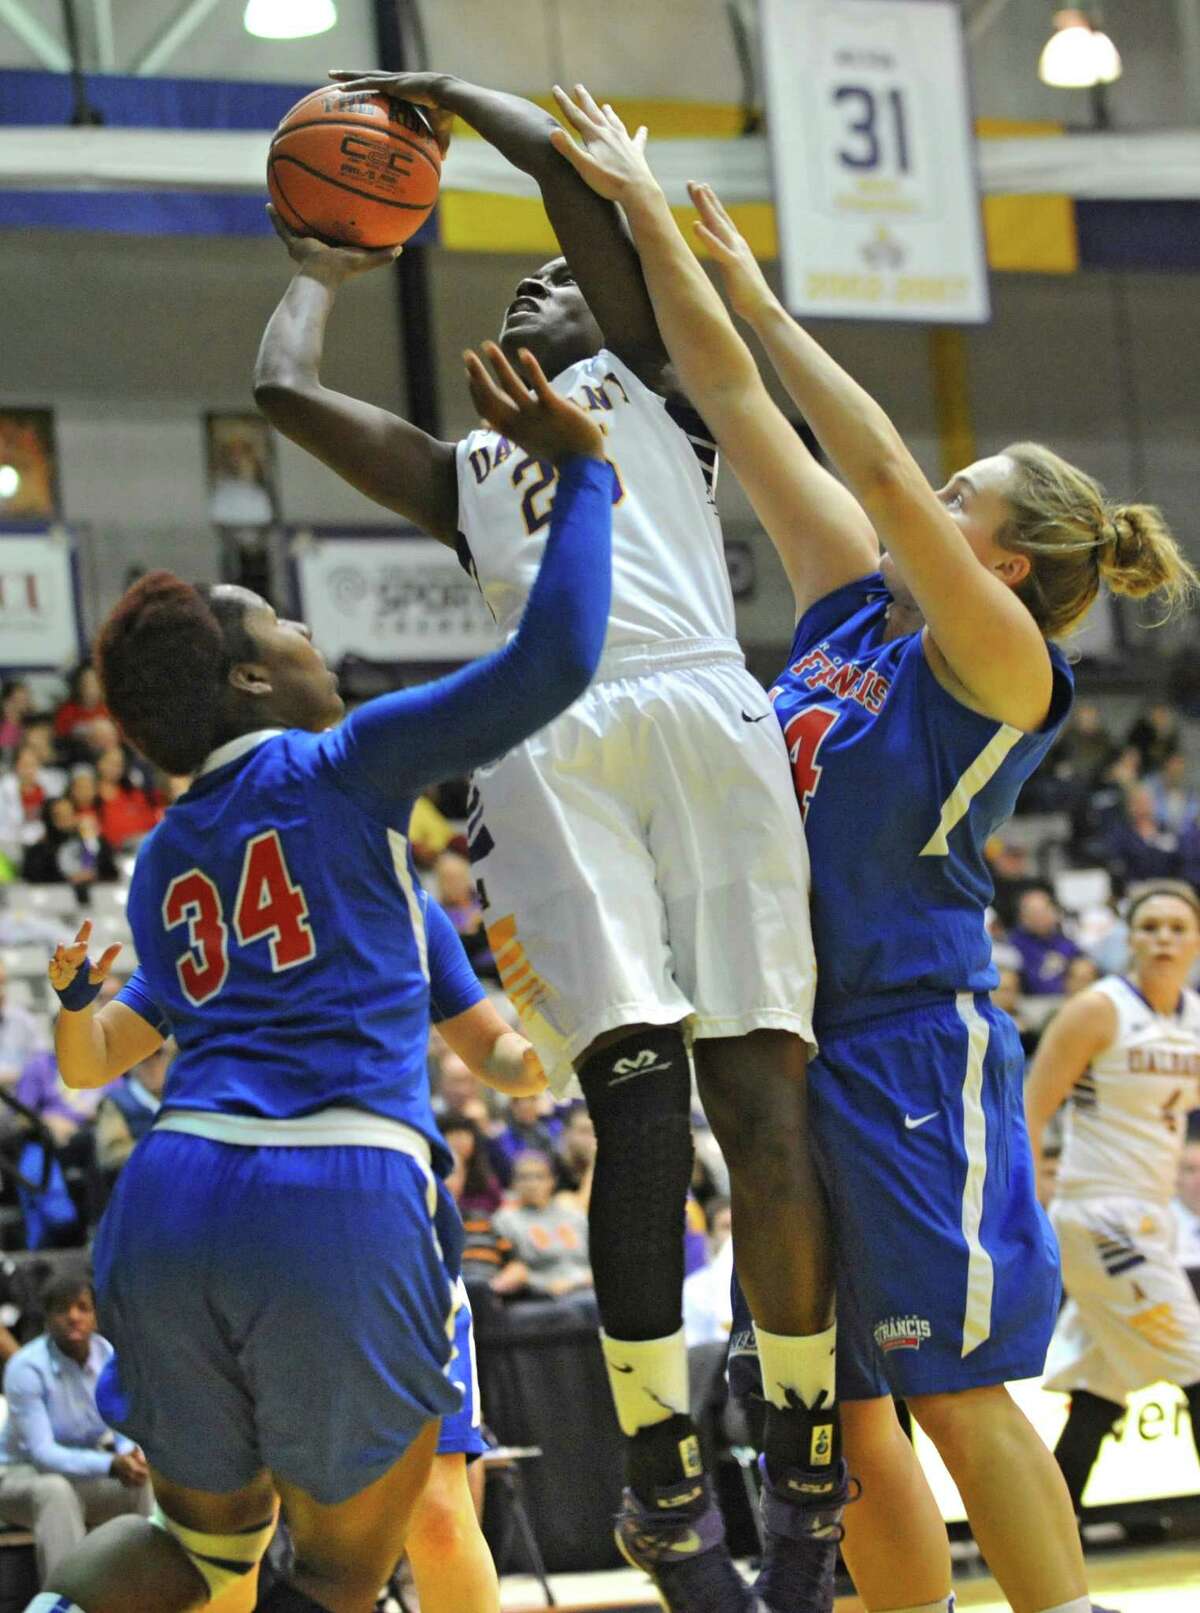 UAlbany's Shereesha Richards goes up for two during a basketball game against St Francis of Brooklyn at University of Albany on Friday, Nov. 14, 2014 in Albany, N.Y. (Lori Van Buren / Times Union)